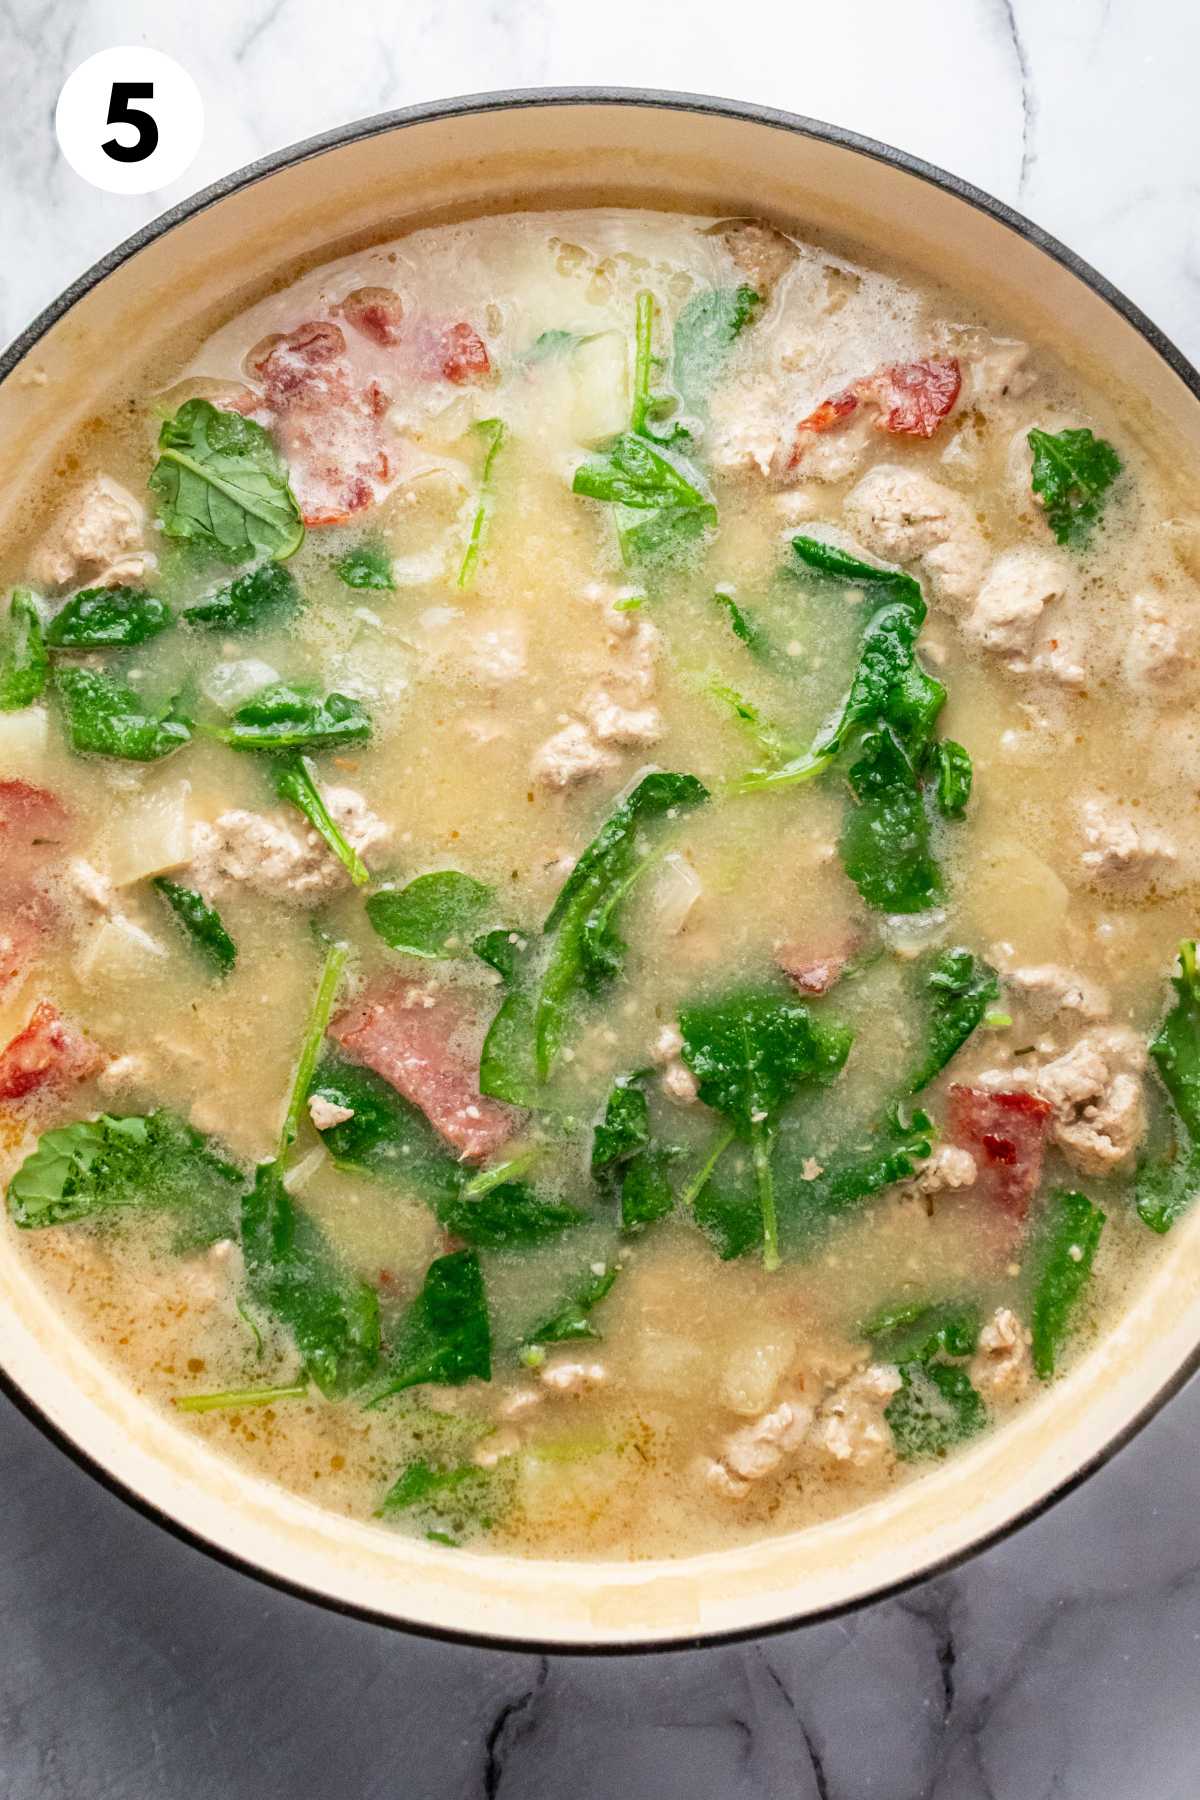 Skinny Zuppa Toscana! This lightened up twist is made with lightened up ingredients and insanely delicious! Creamy, savory and well balanced for a yummy winter meal. Gluten Free + Low Calorie + Paleo